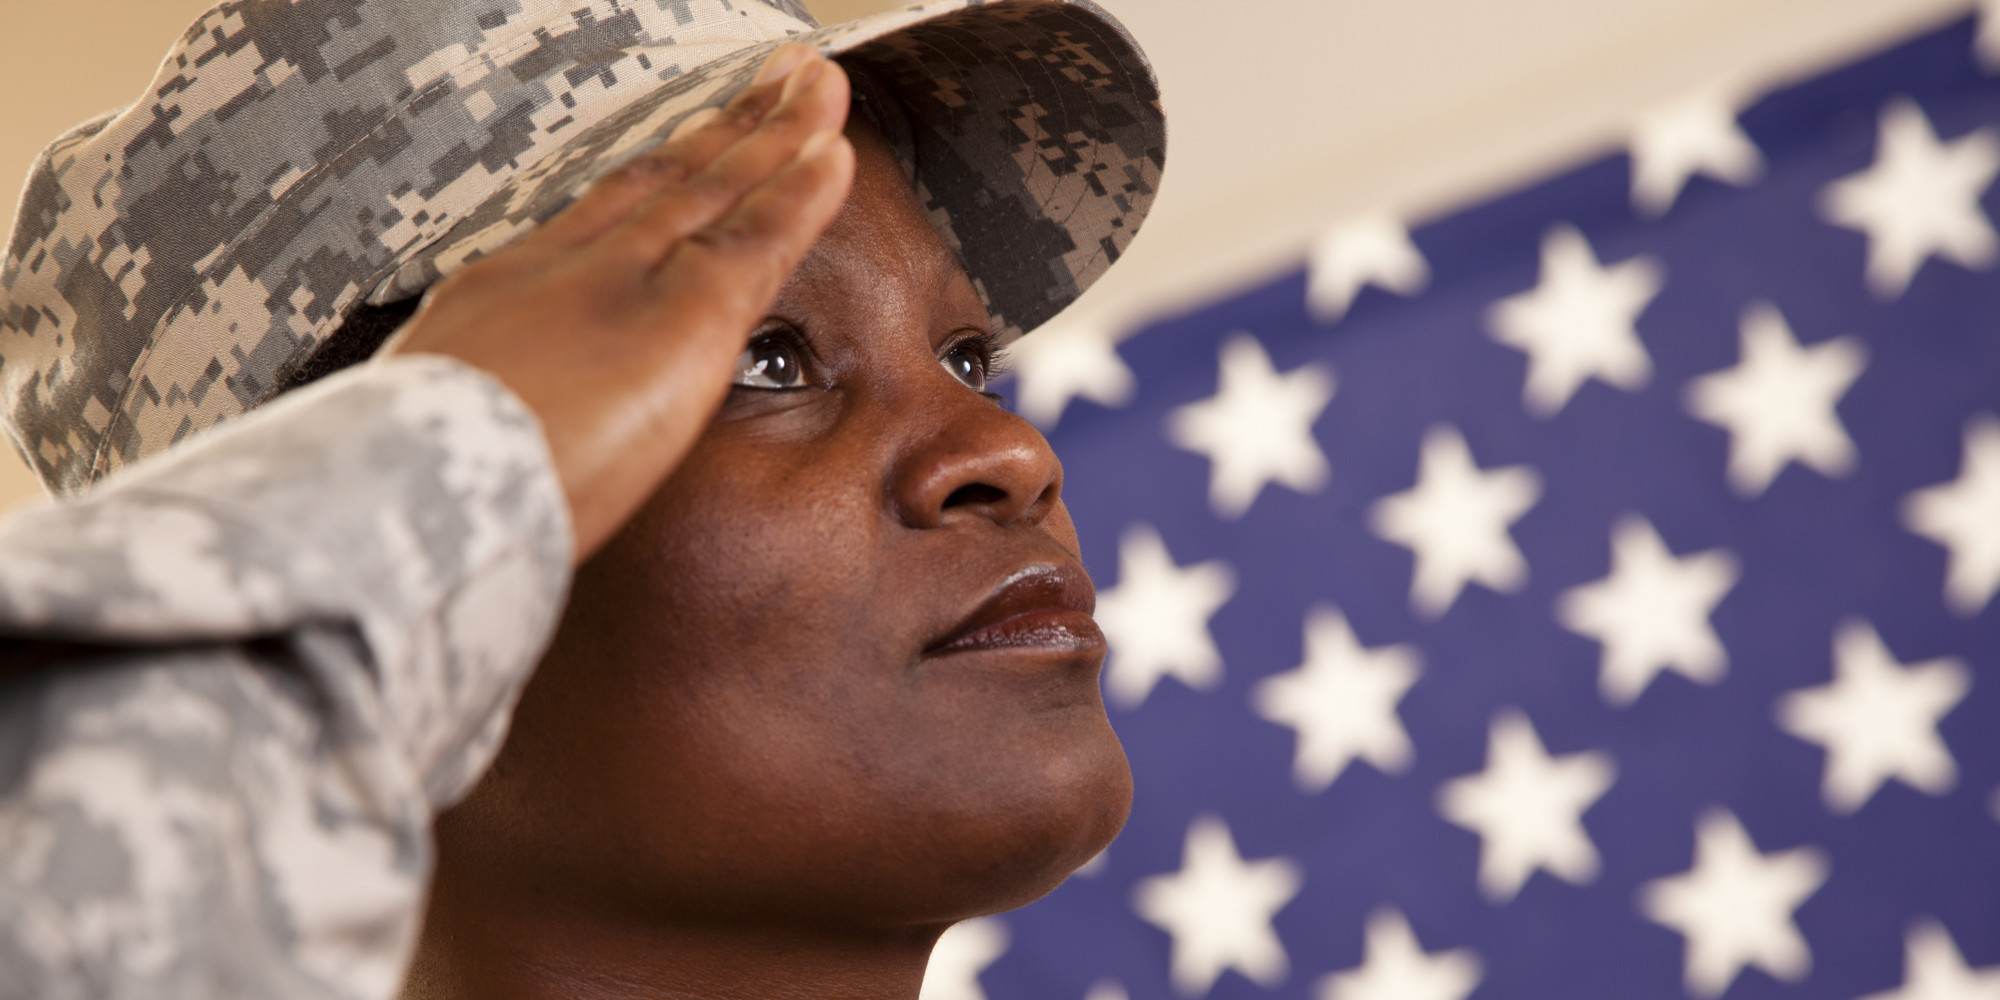 Patriotism: African descent military woman salutes American flag.